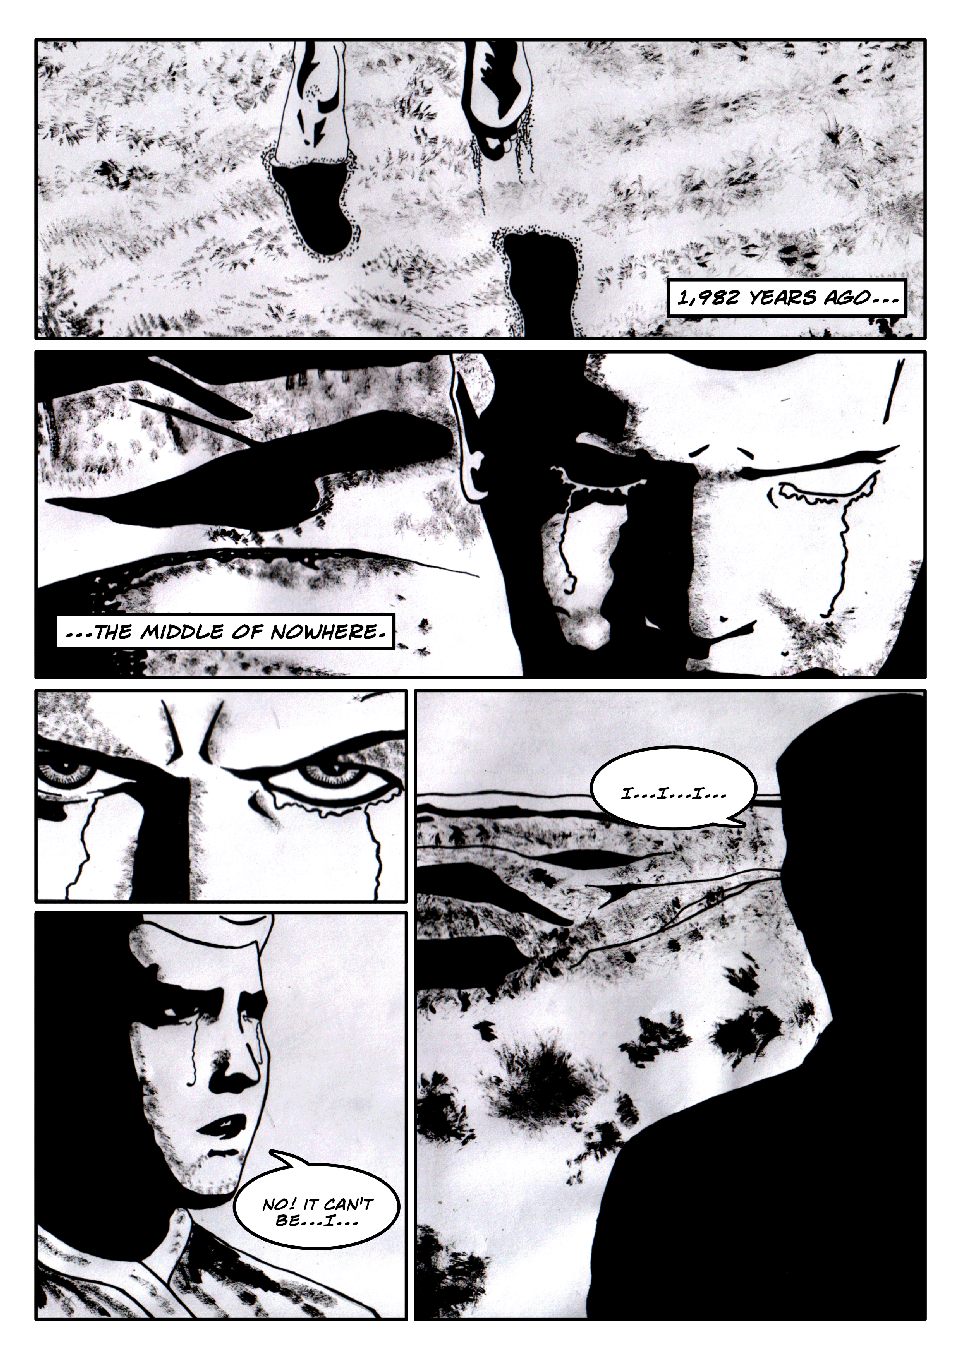 Issue One - Page One